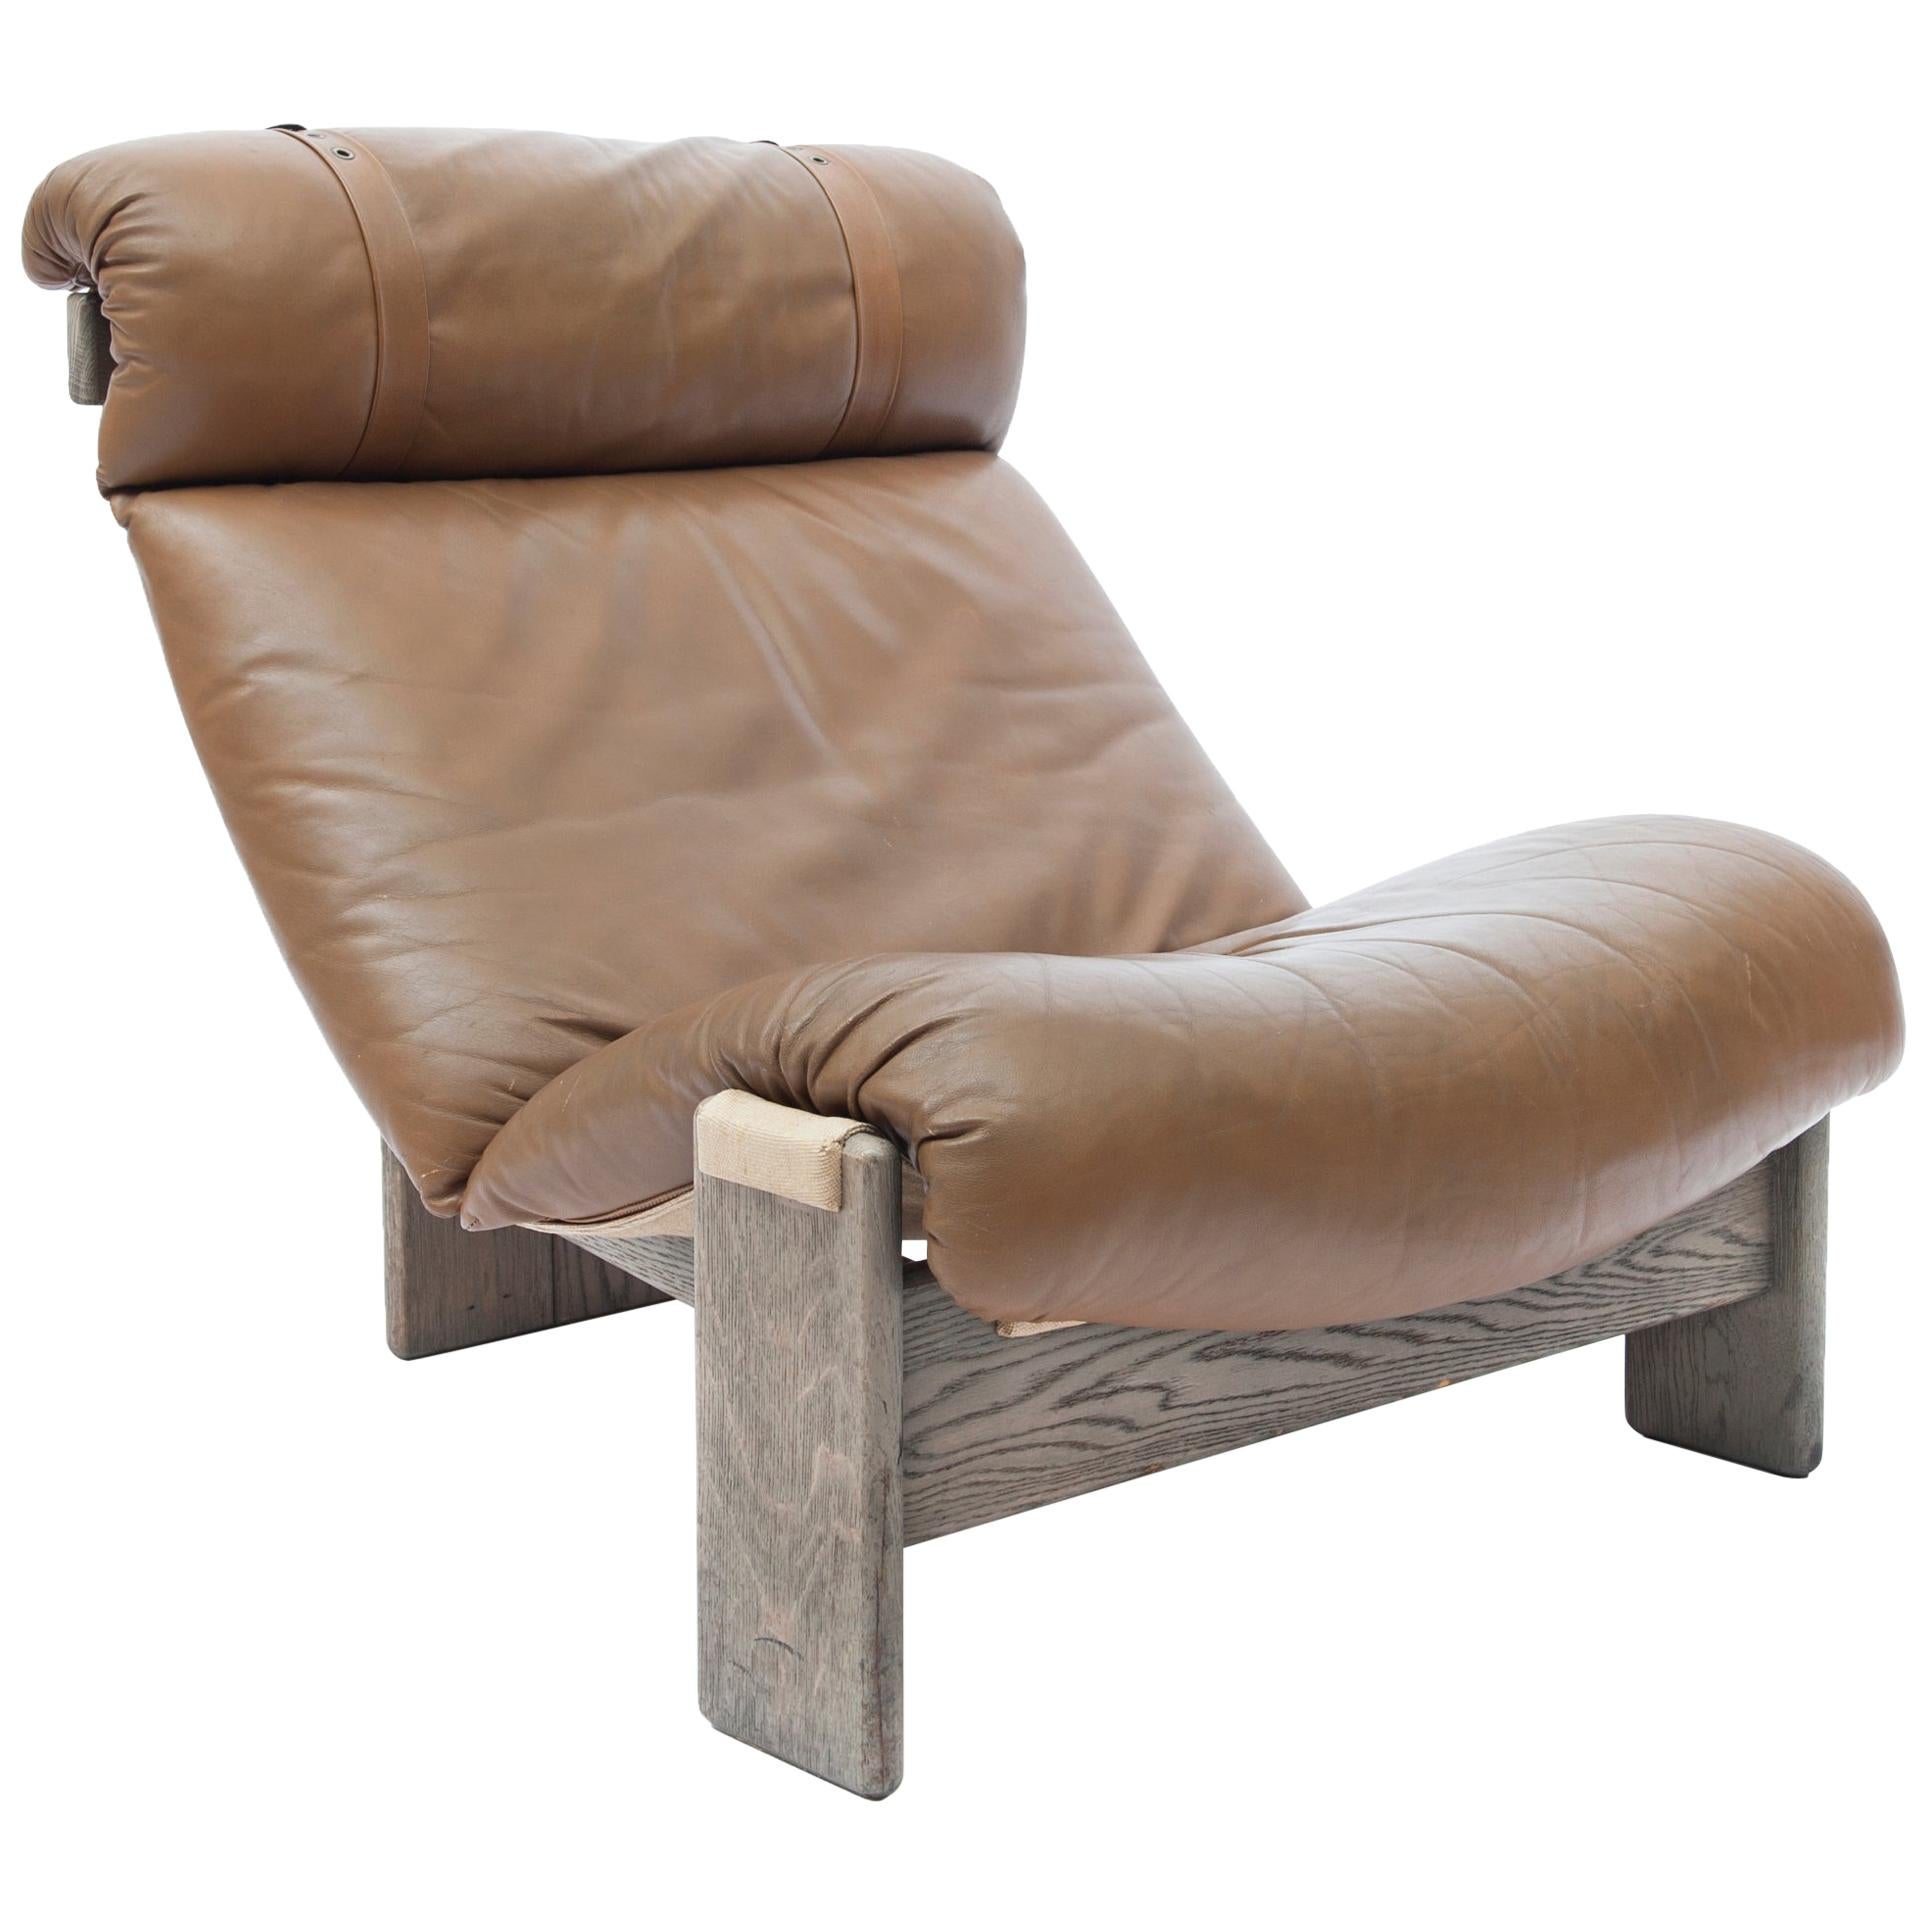 Tripod Lounge Chair in Oak, Leather and Canvas, 1970s For Sale at 1stDibs